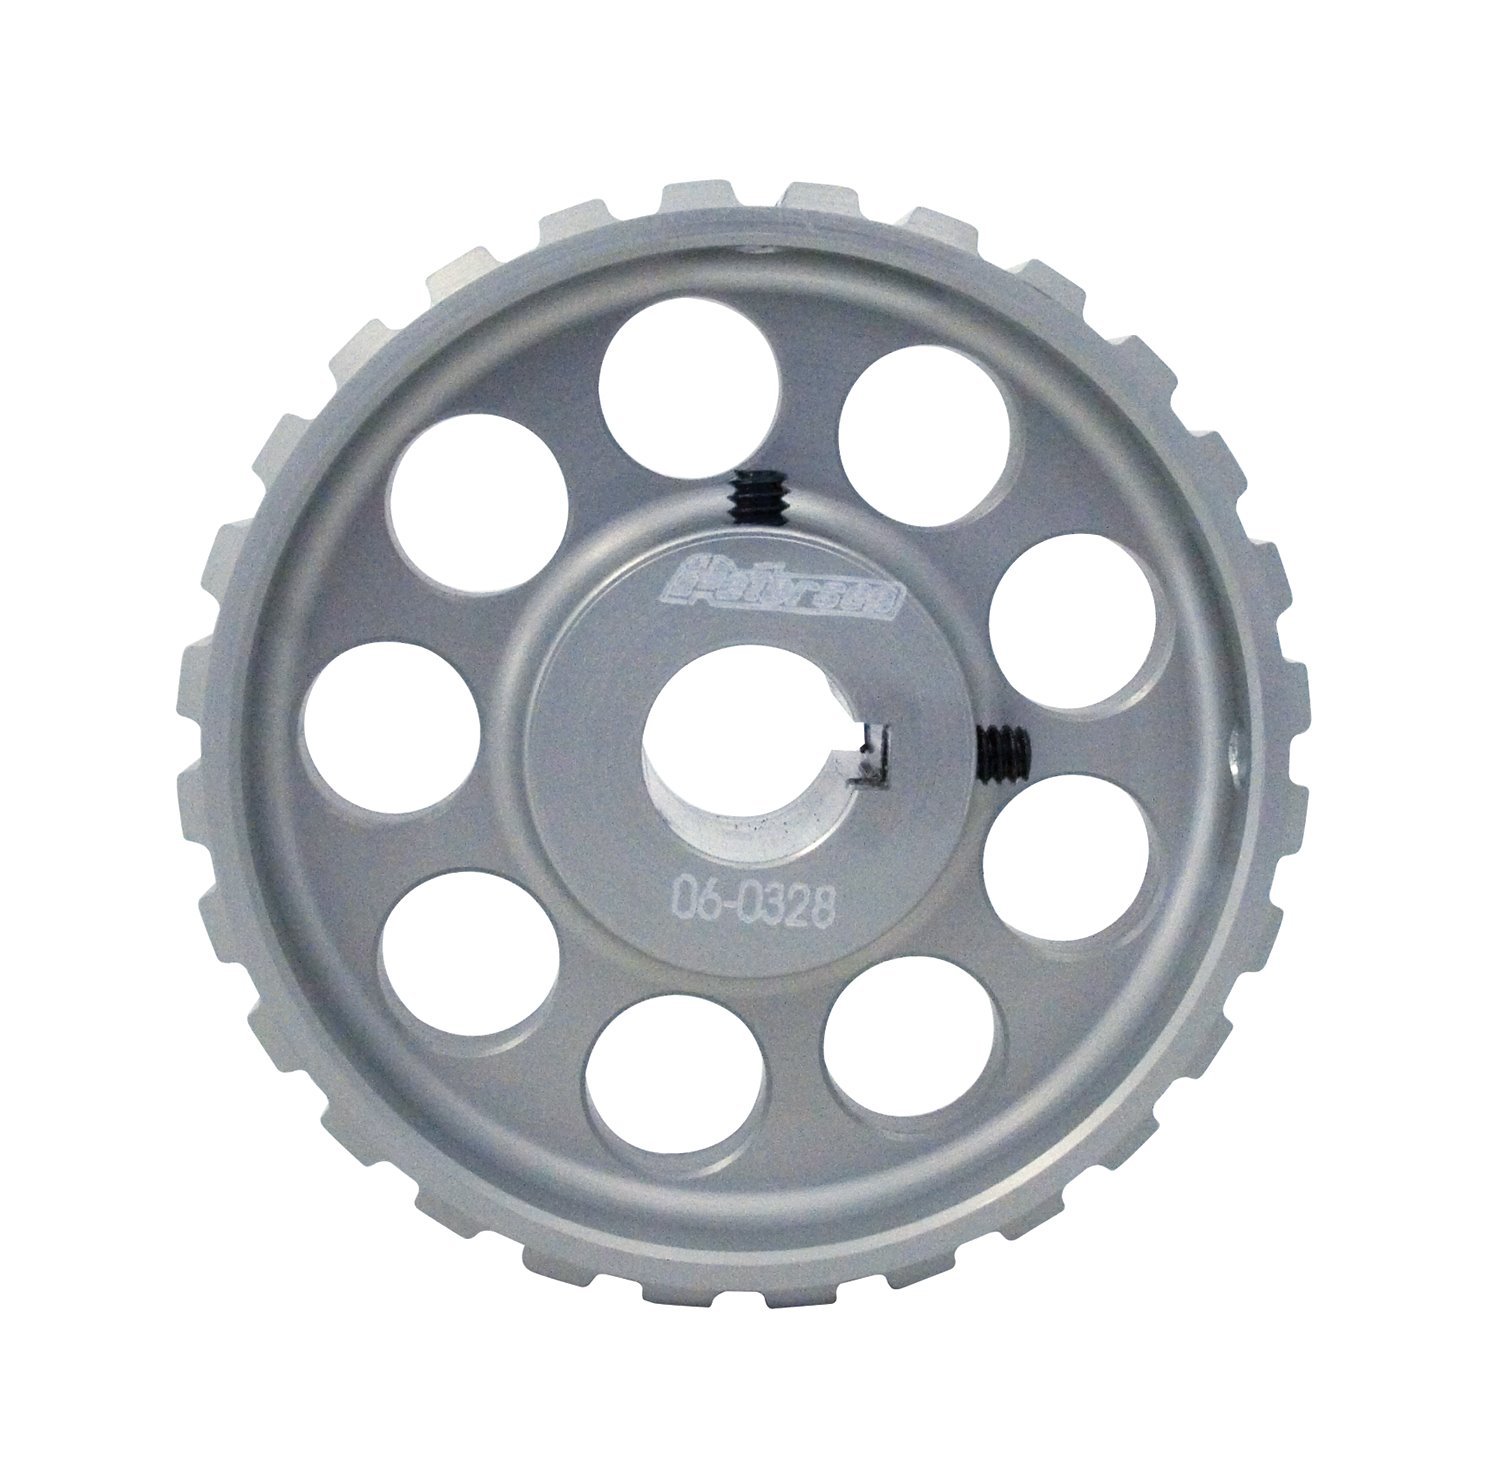 PULLEY 28T 1 in. WIDE 5/8 BORE LW